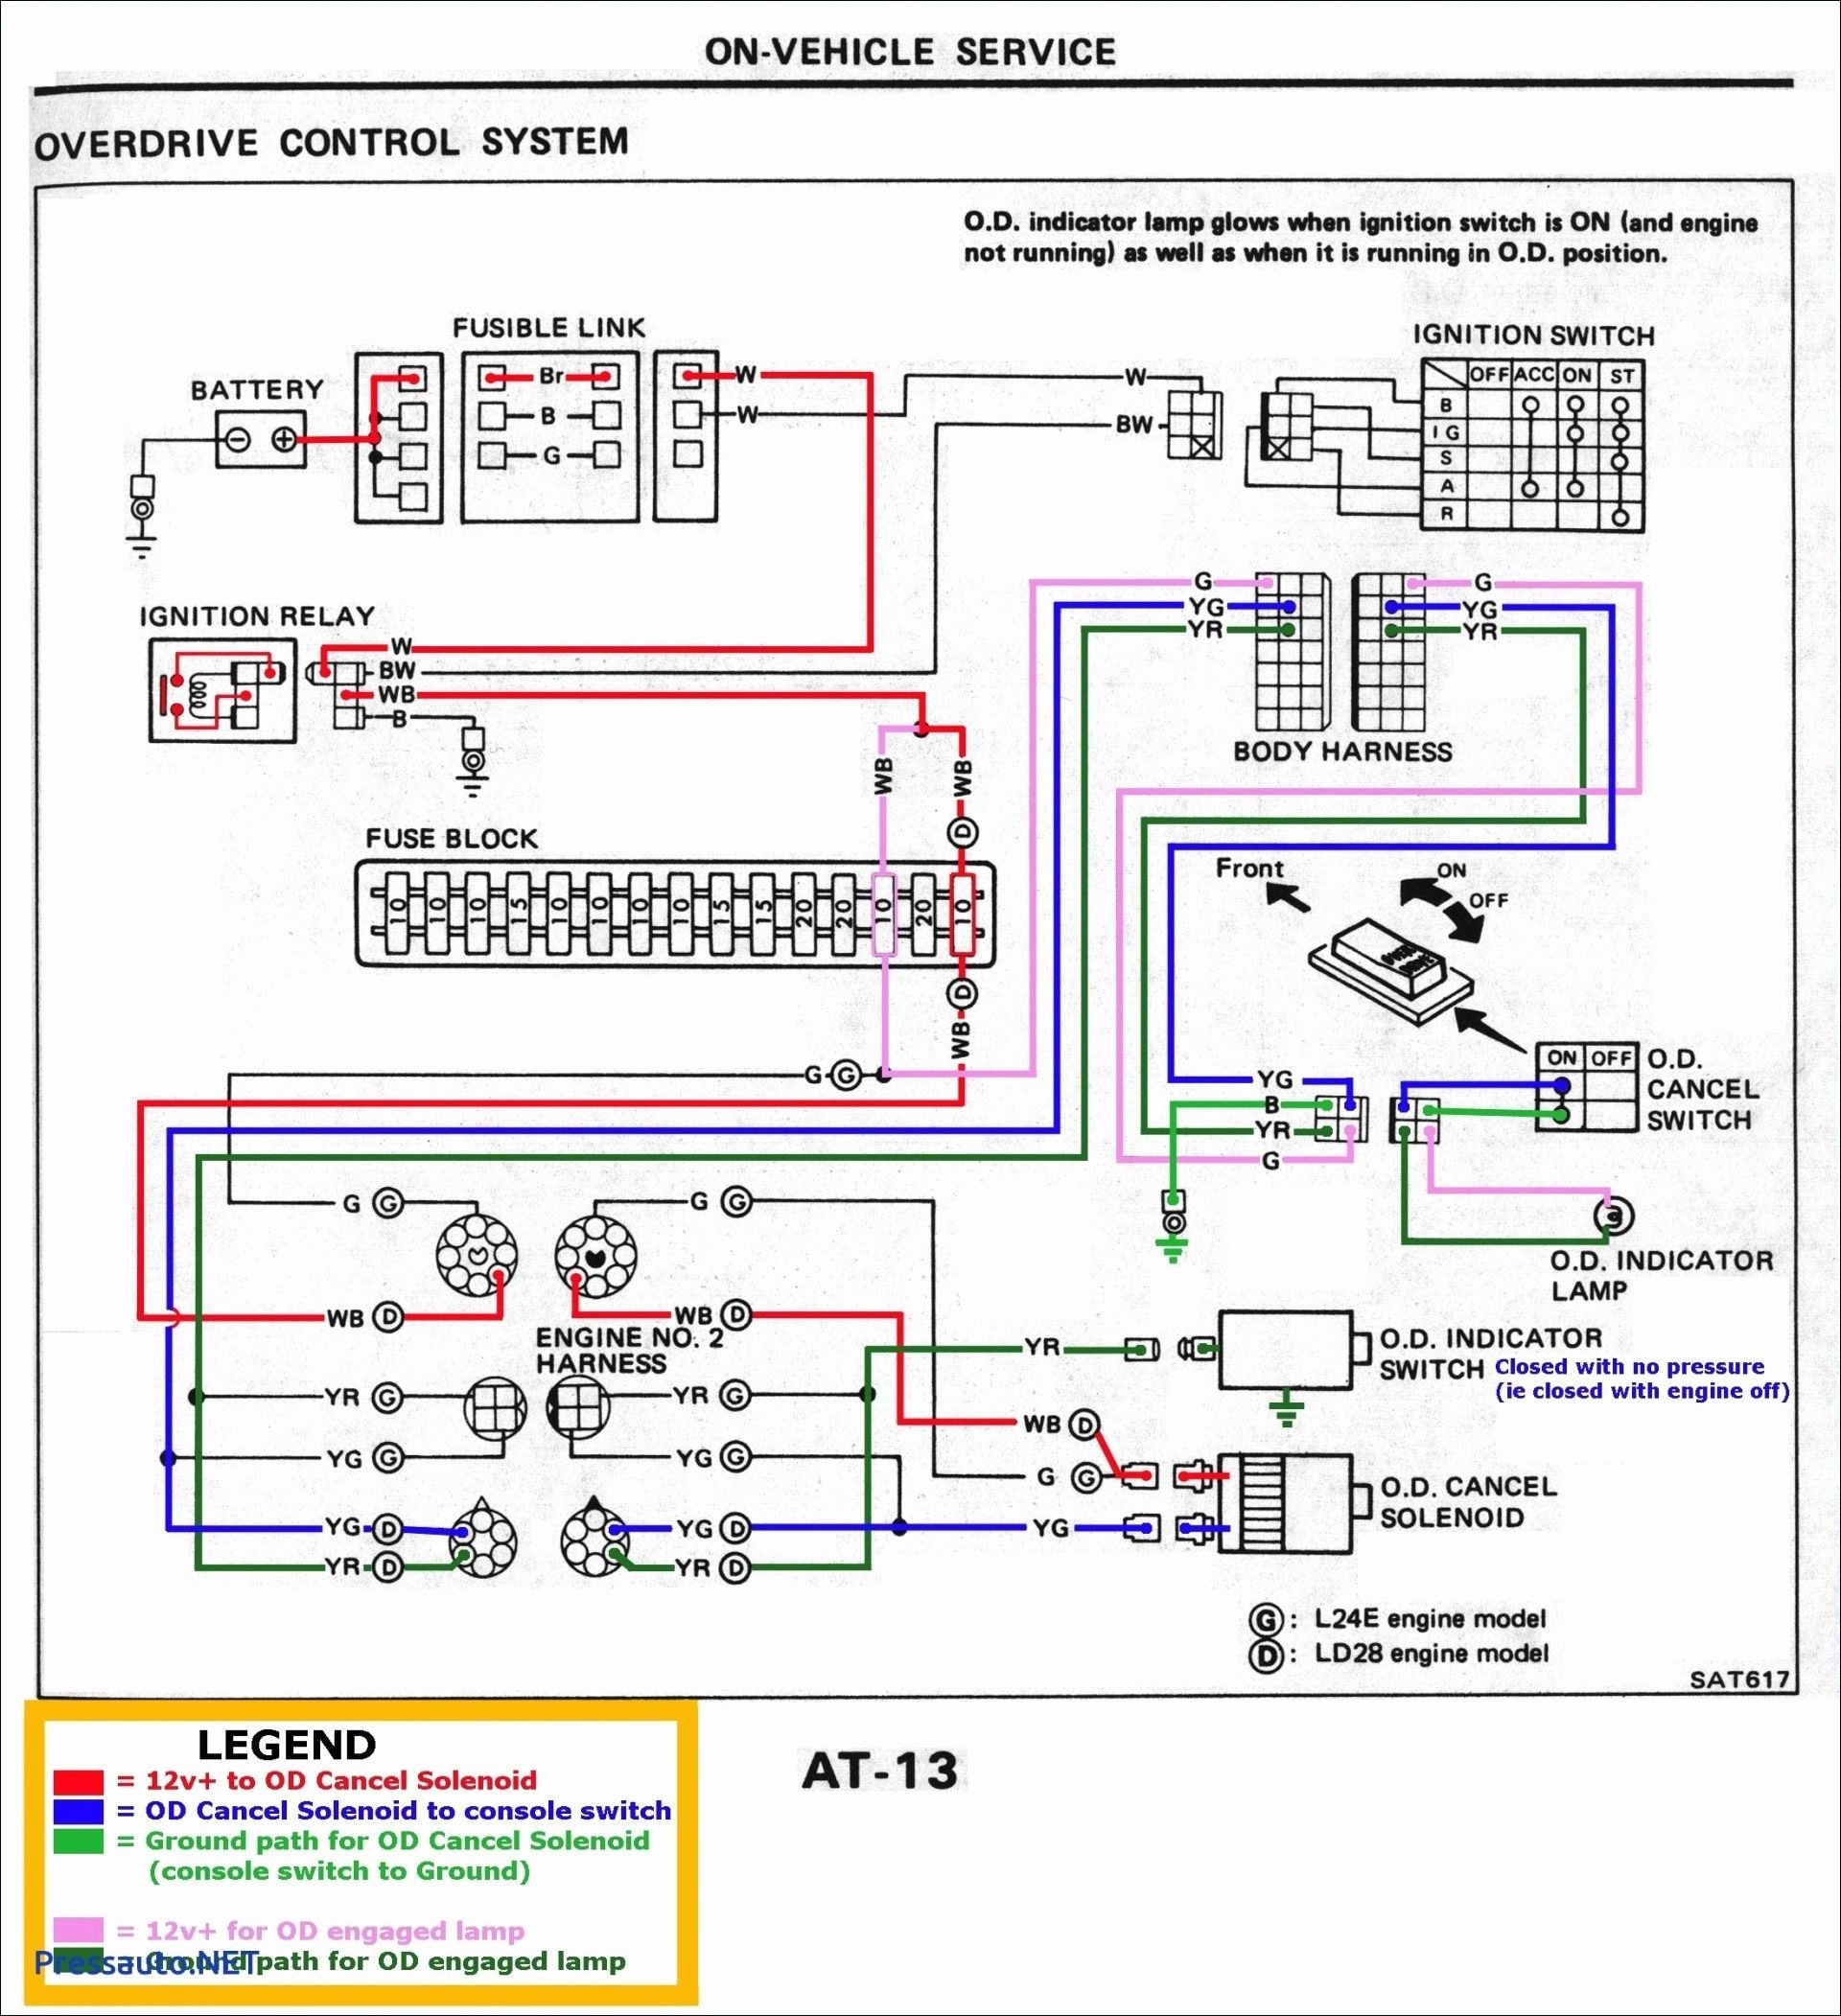 Wiring Diagram for 12v Auto Relay Inspirationa Wiring Diagram Relay Spotlights Save Wiring Diagram Relay Wire